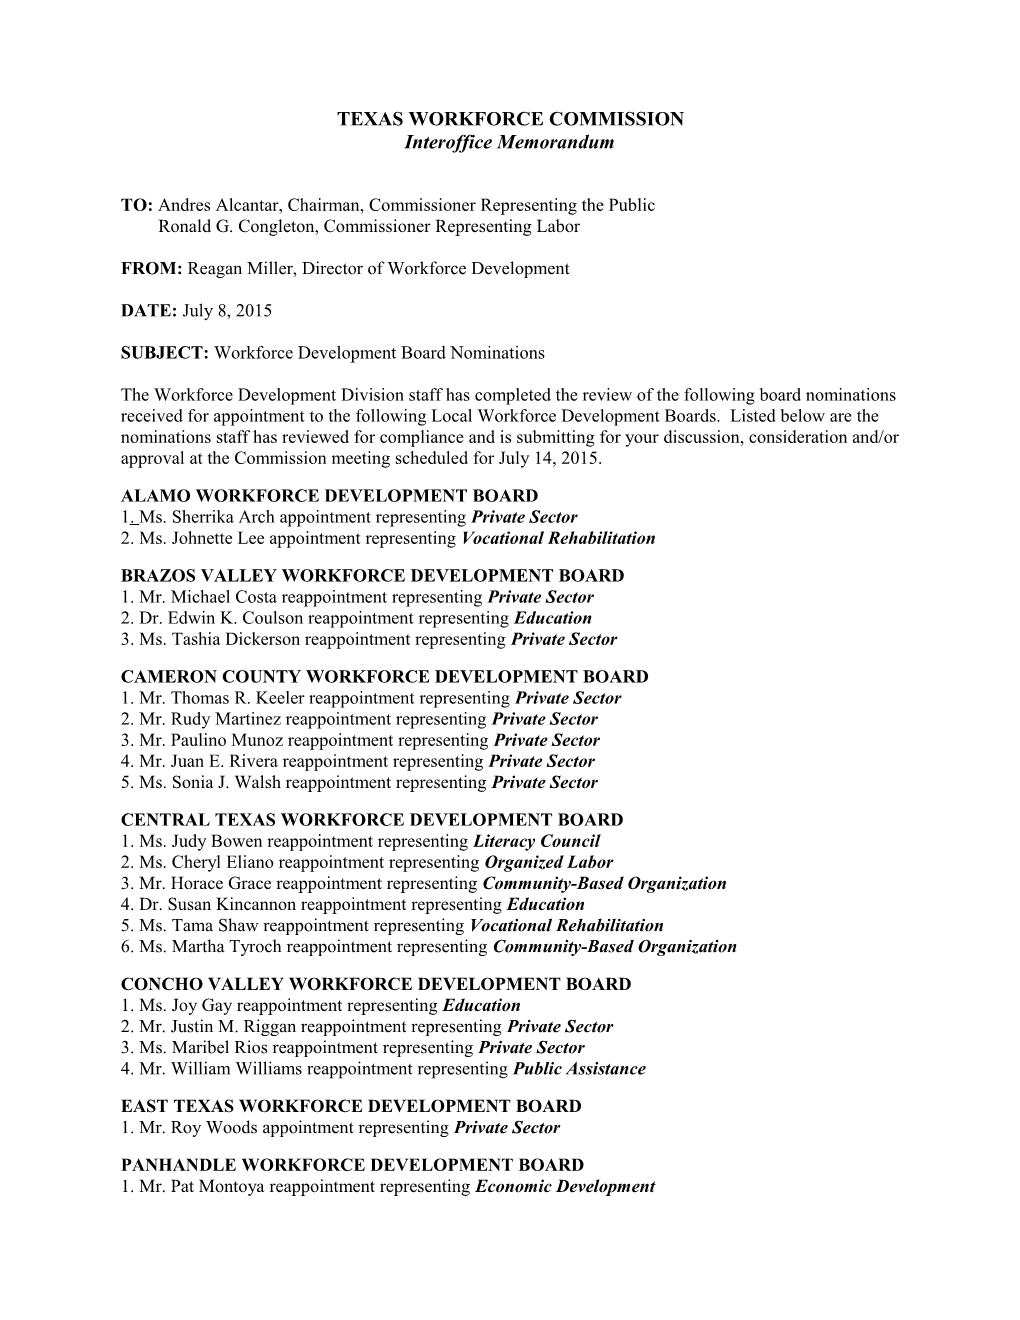 Commission Meeting Materials July 14, 2015 - Board Nominees